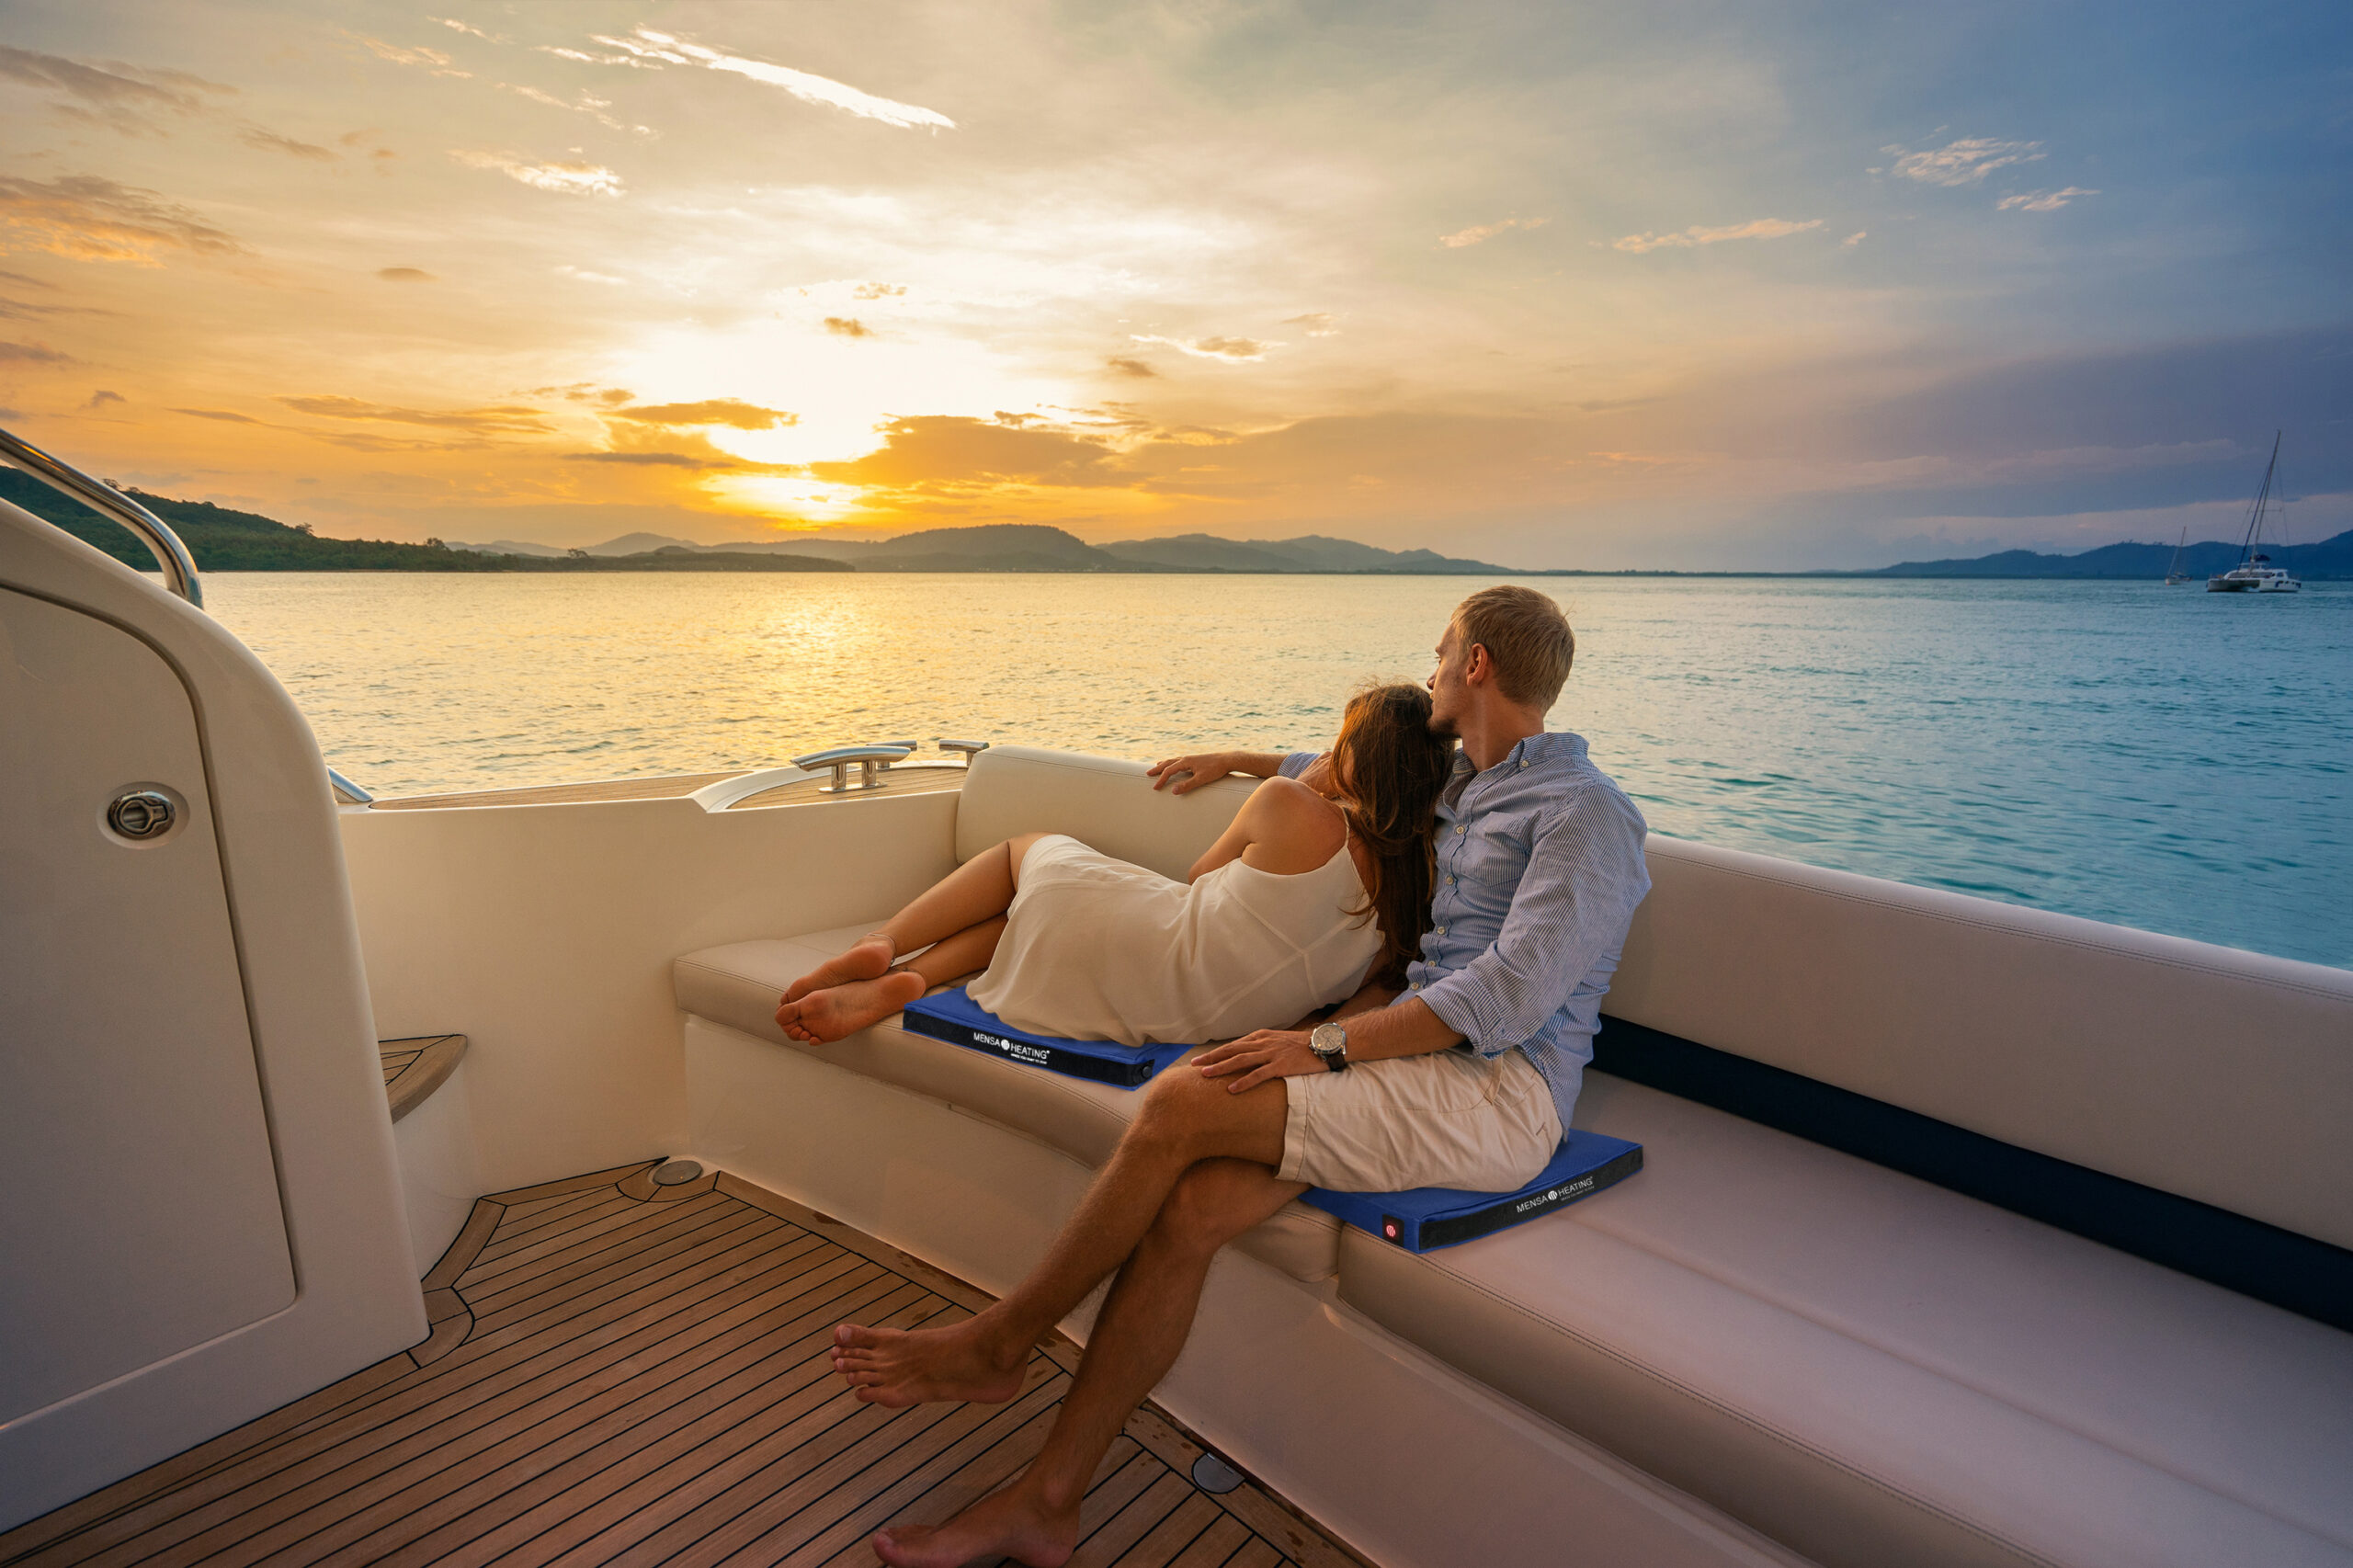 Romantic vacation . Beautiful couple looking in sunset from the yacht.